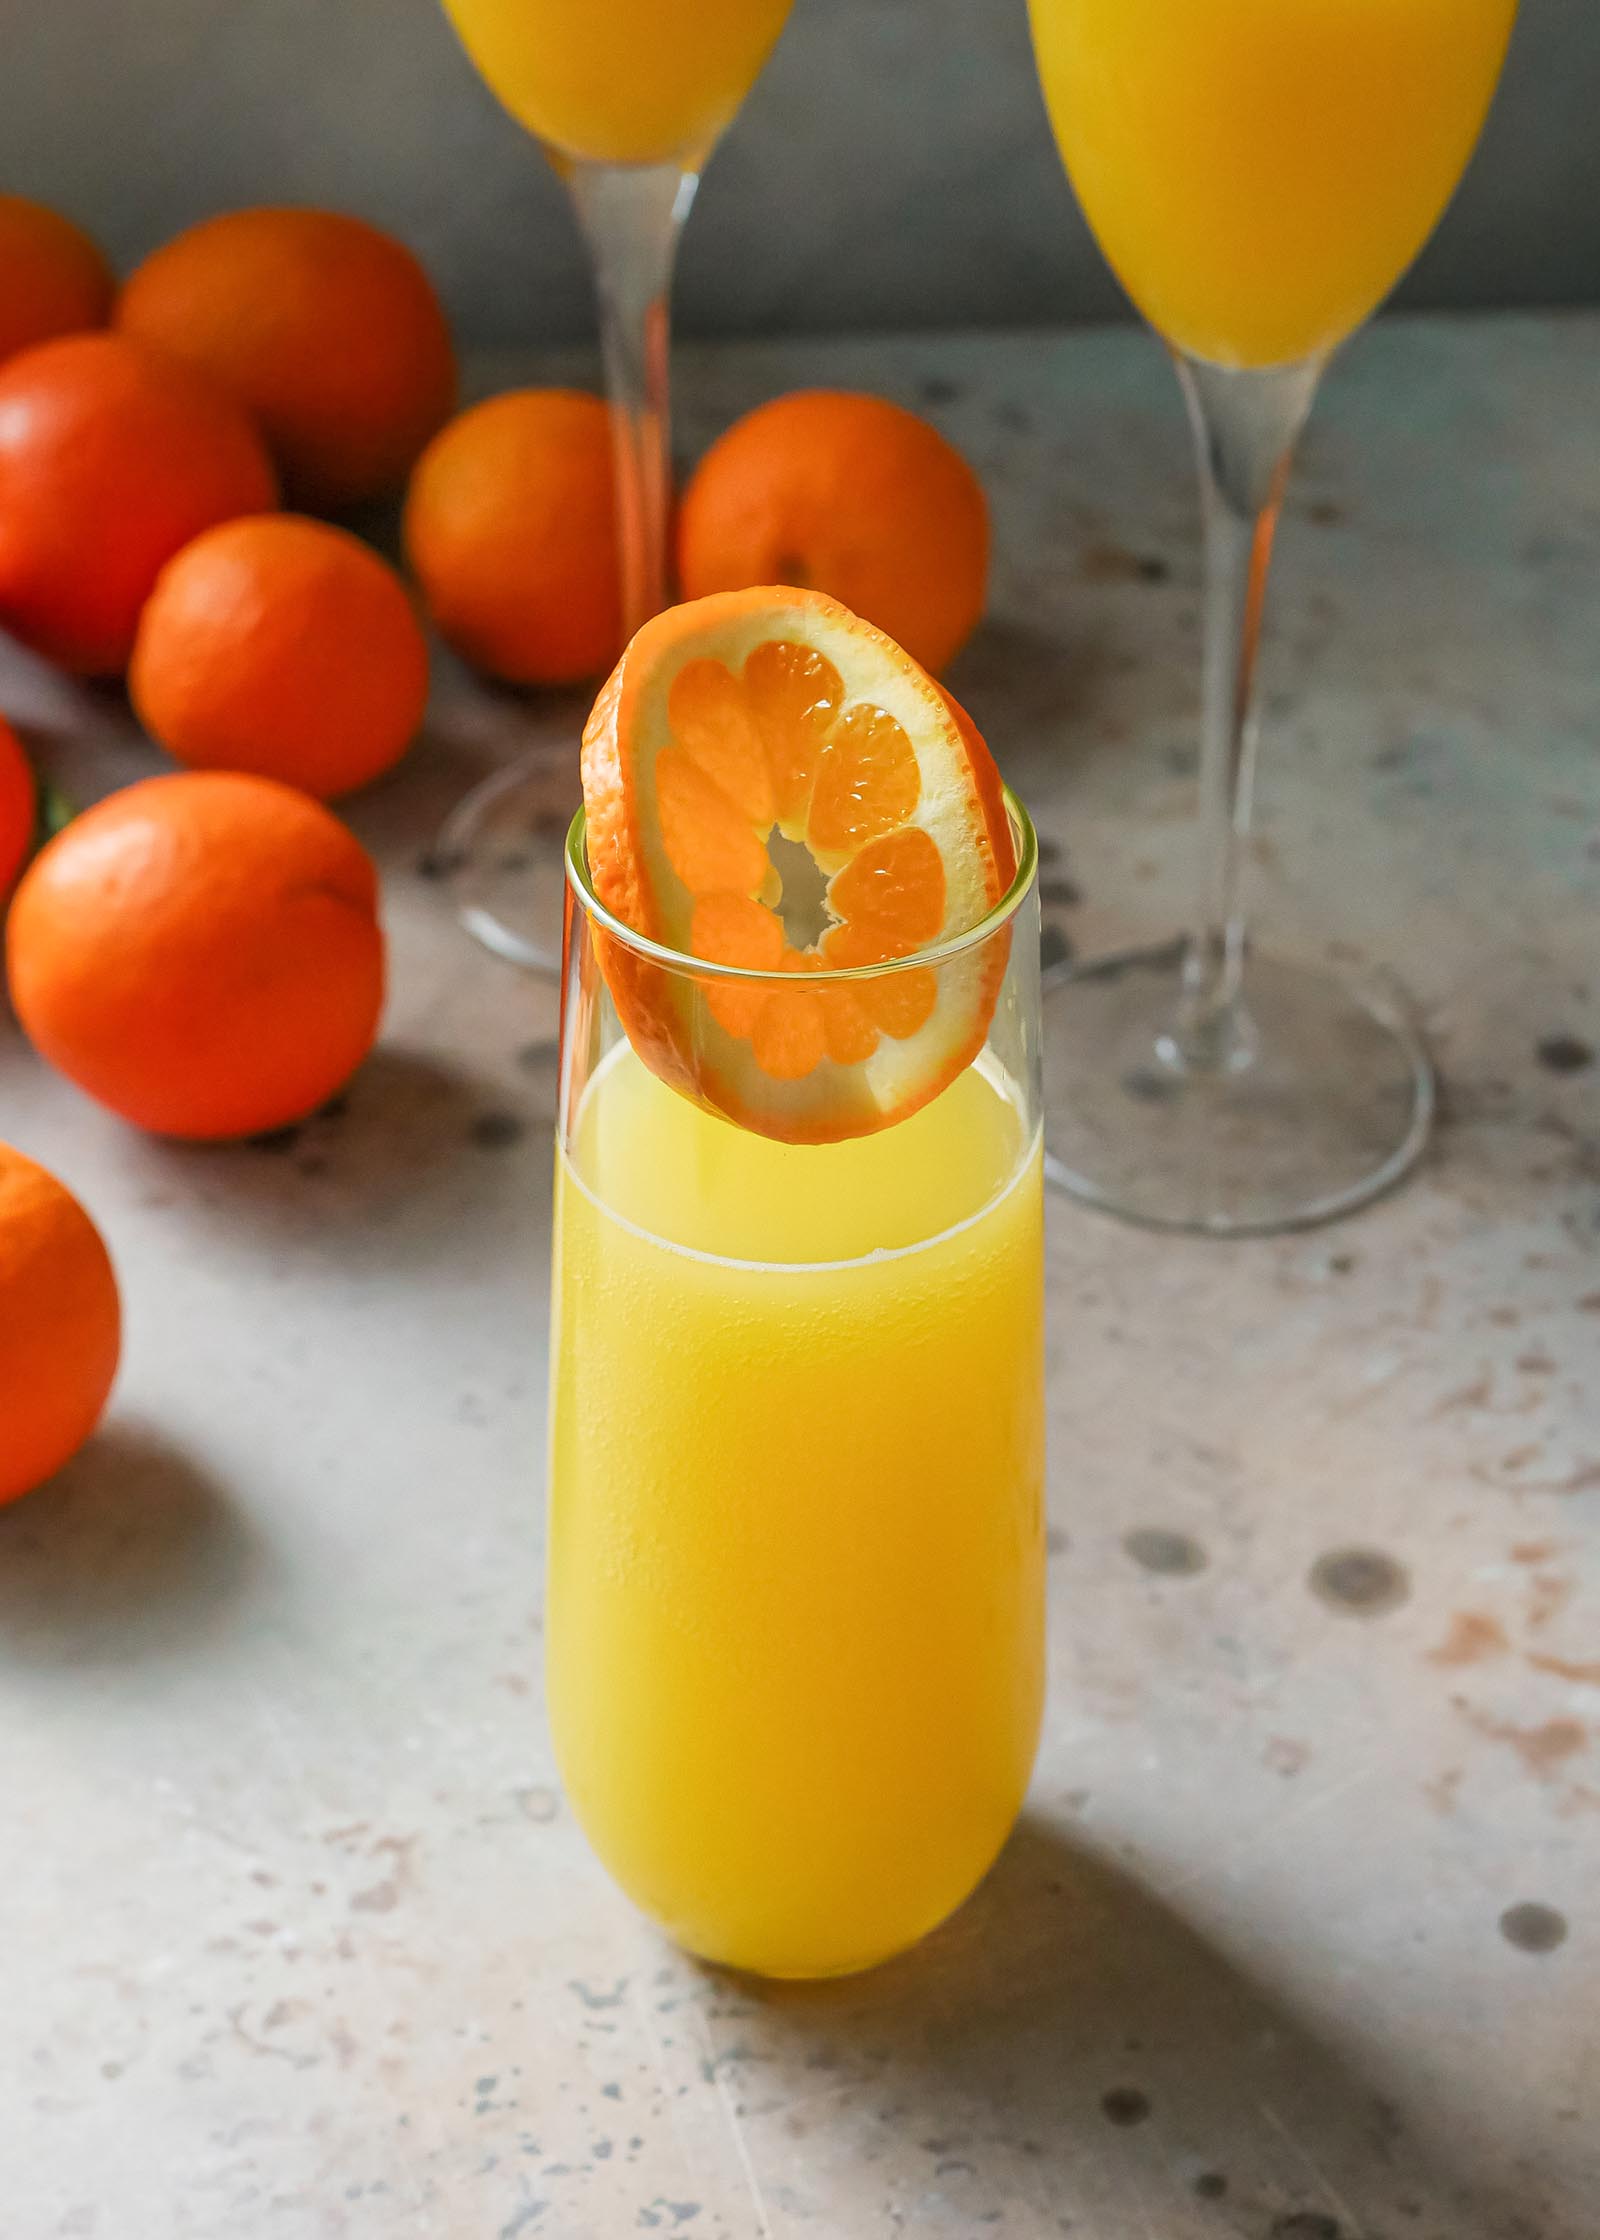 Eeasy mimosa in a glass with an orange slice inside. Two flutes of mimosa are behind the glass and oranges are behind the drinks.